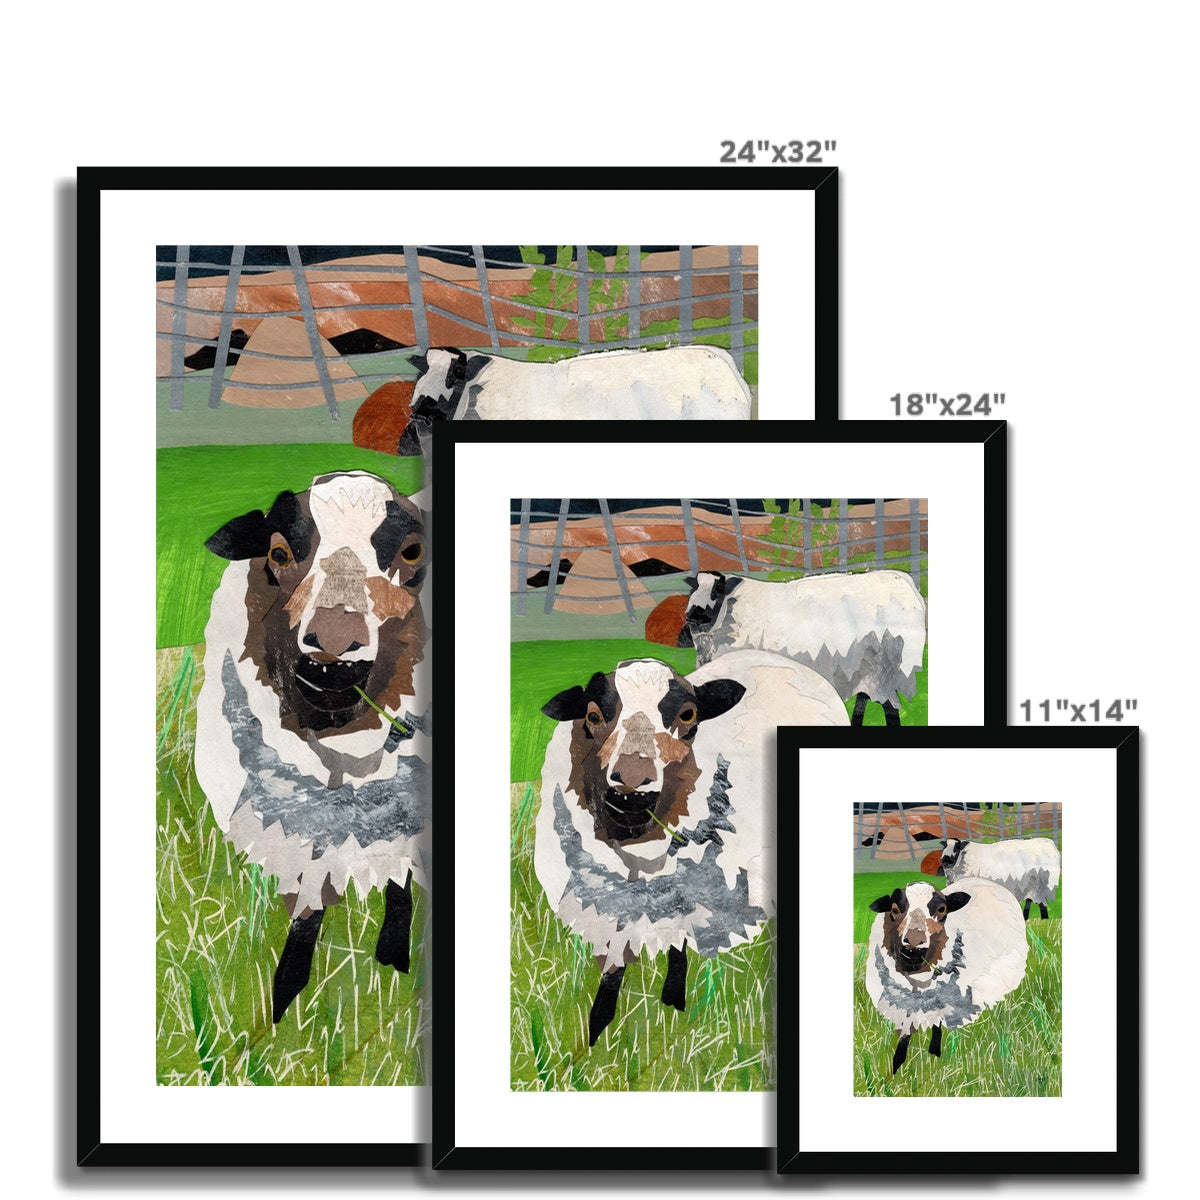 Grazing in the Grass Framed & Matted Print